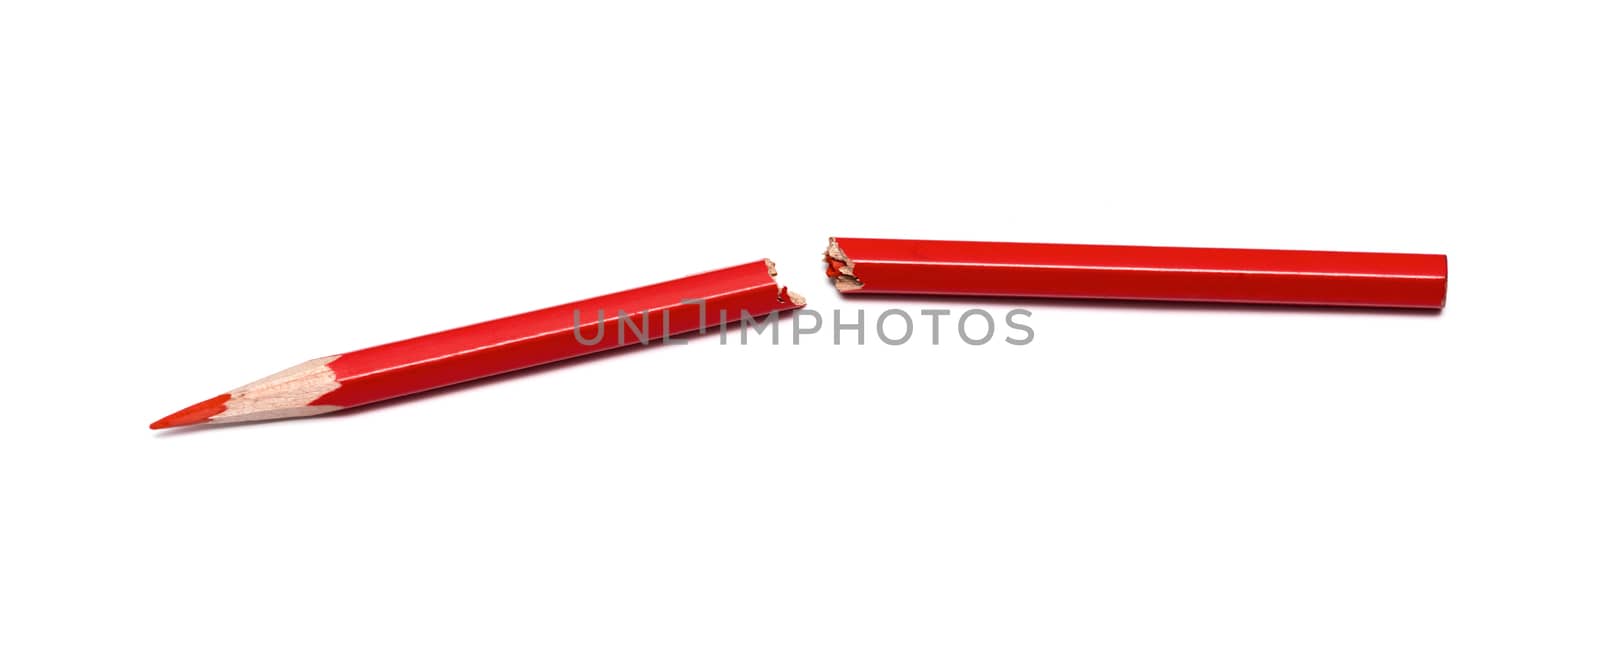 broken red pencil on a white background by DNKSTUDIO